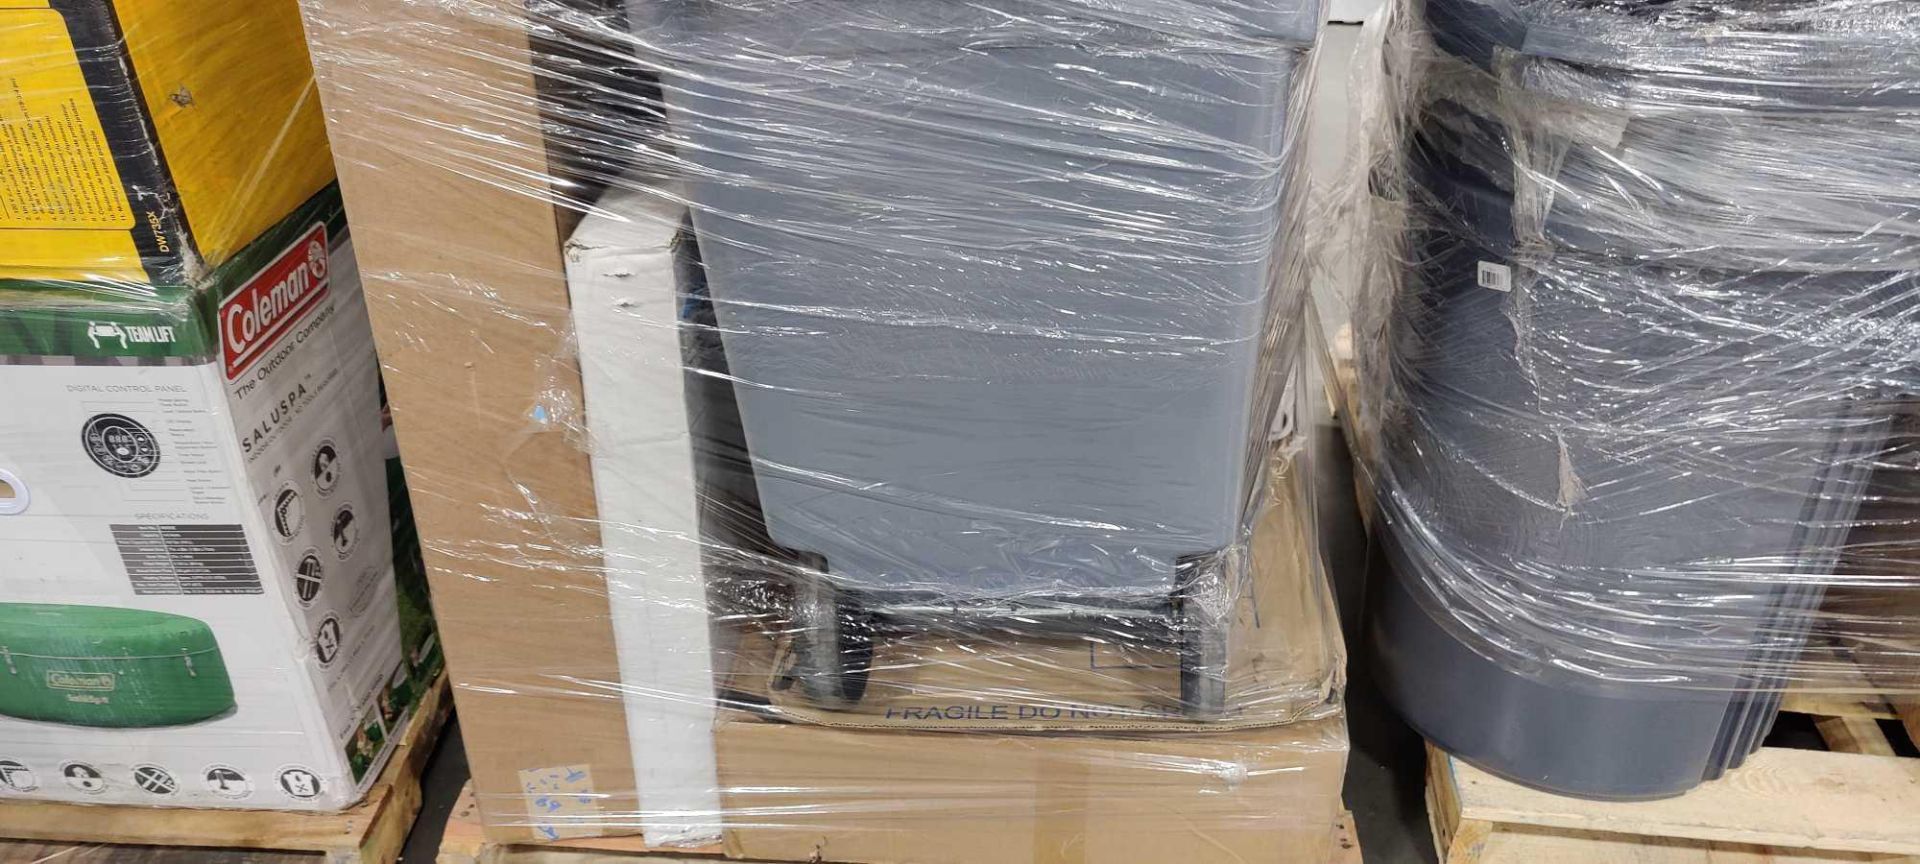 Two Pallets - Image 10 of 16